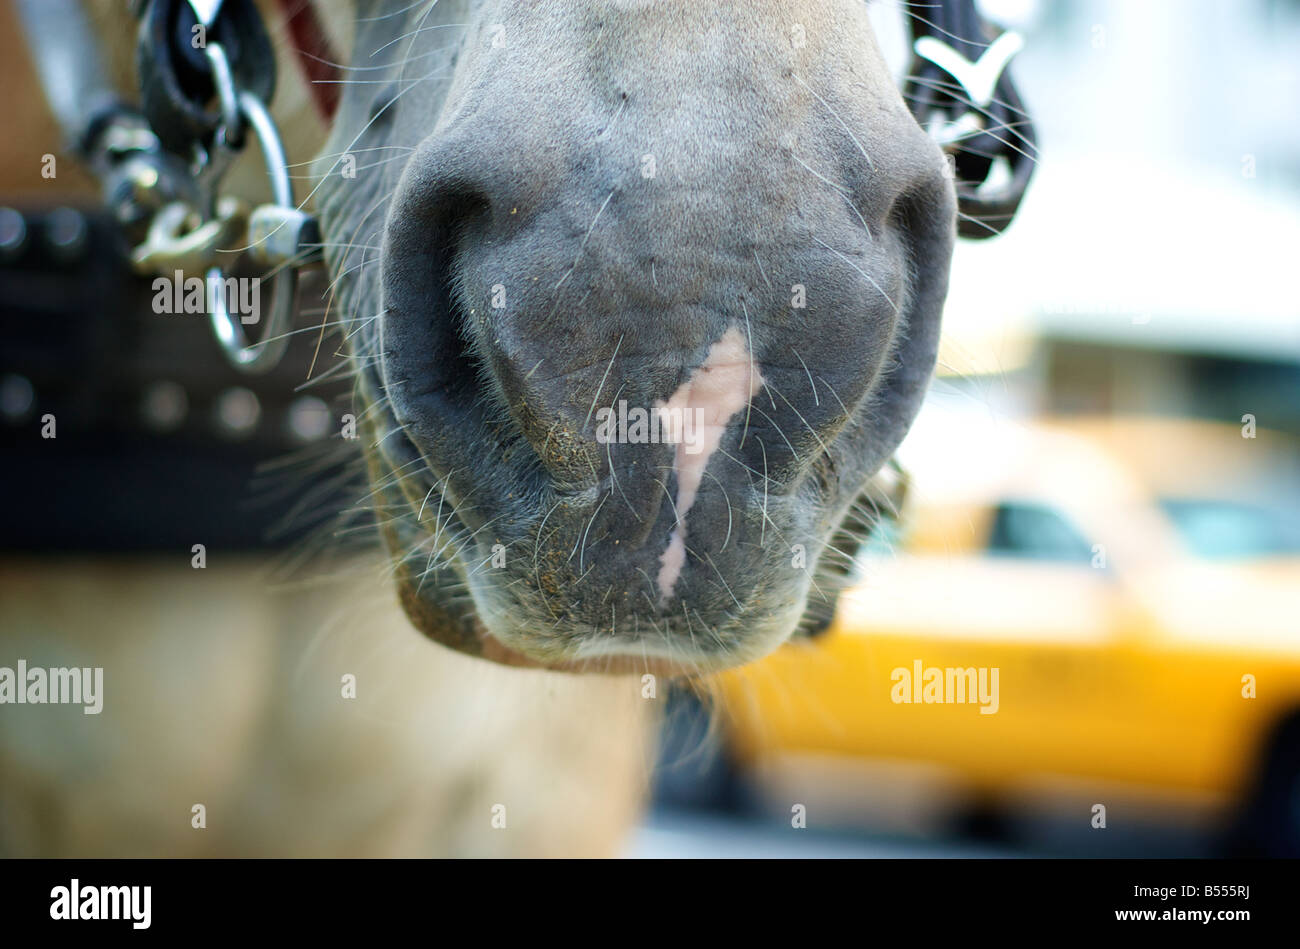 Extreme Closeup of Carriage Horse Mouth in New York City Stock Photo